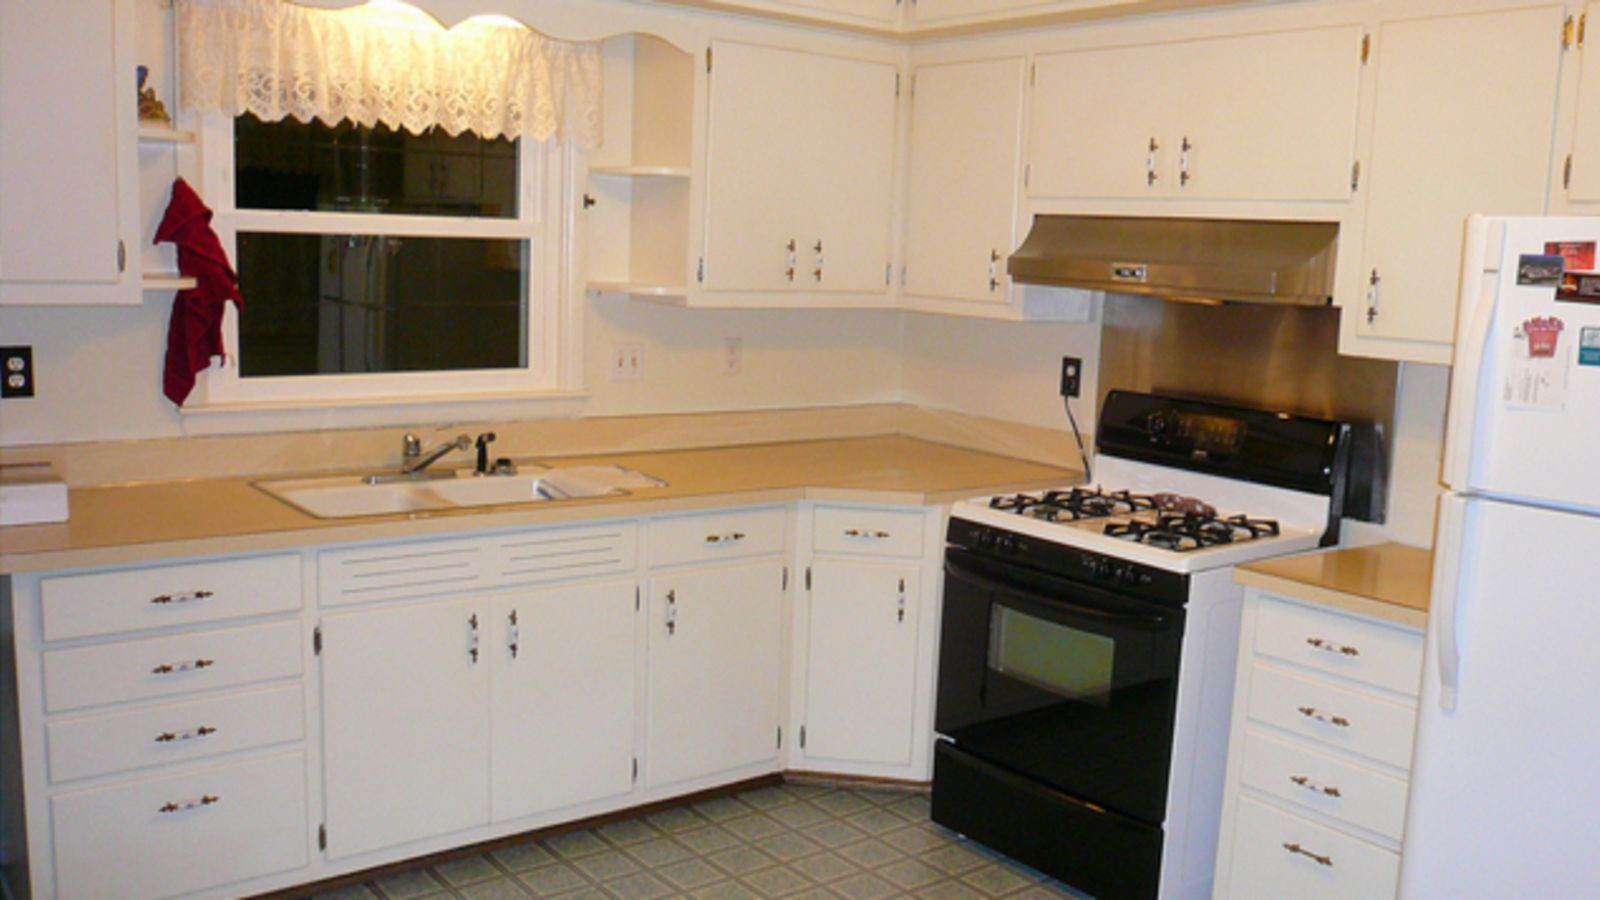 Kitchen Cabinet Counters
 Five Ways to Update Old Kitchen Counters